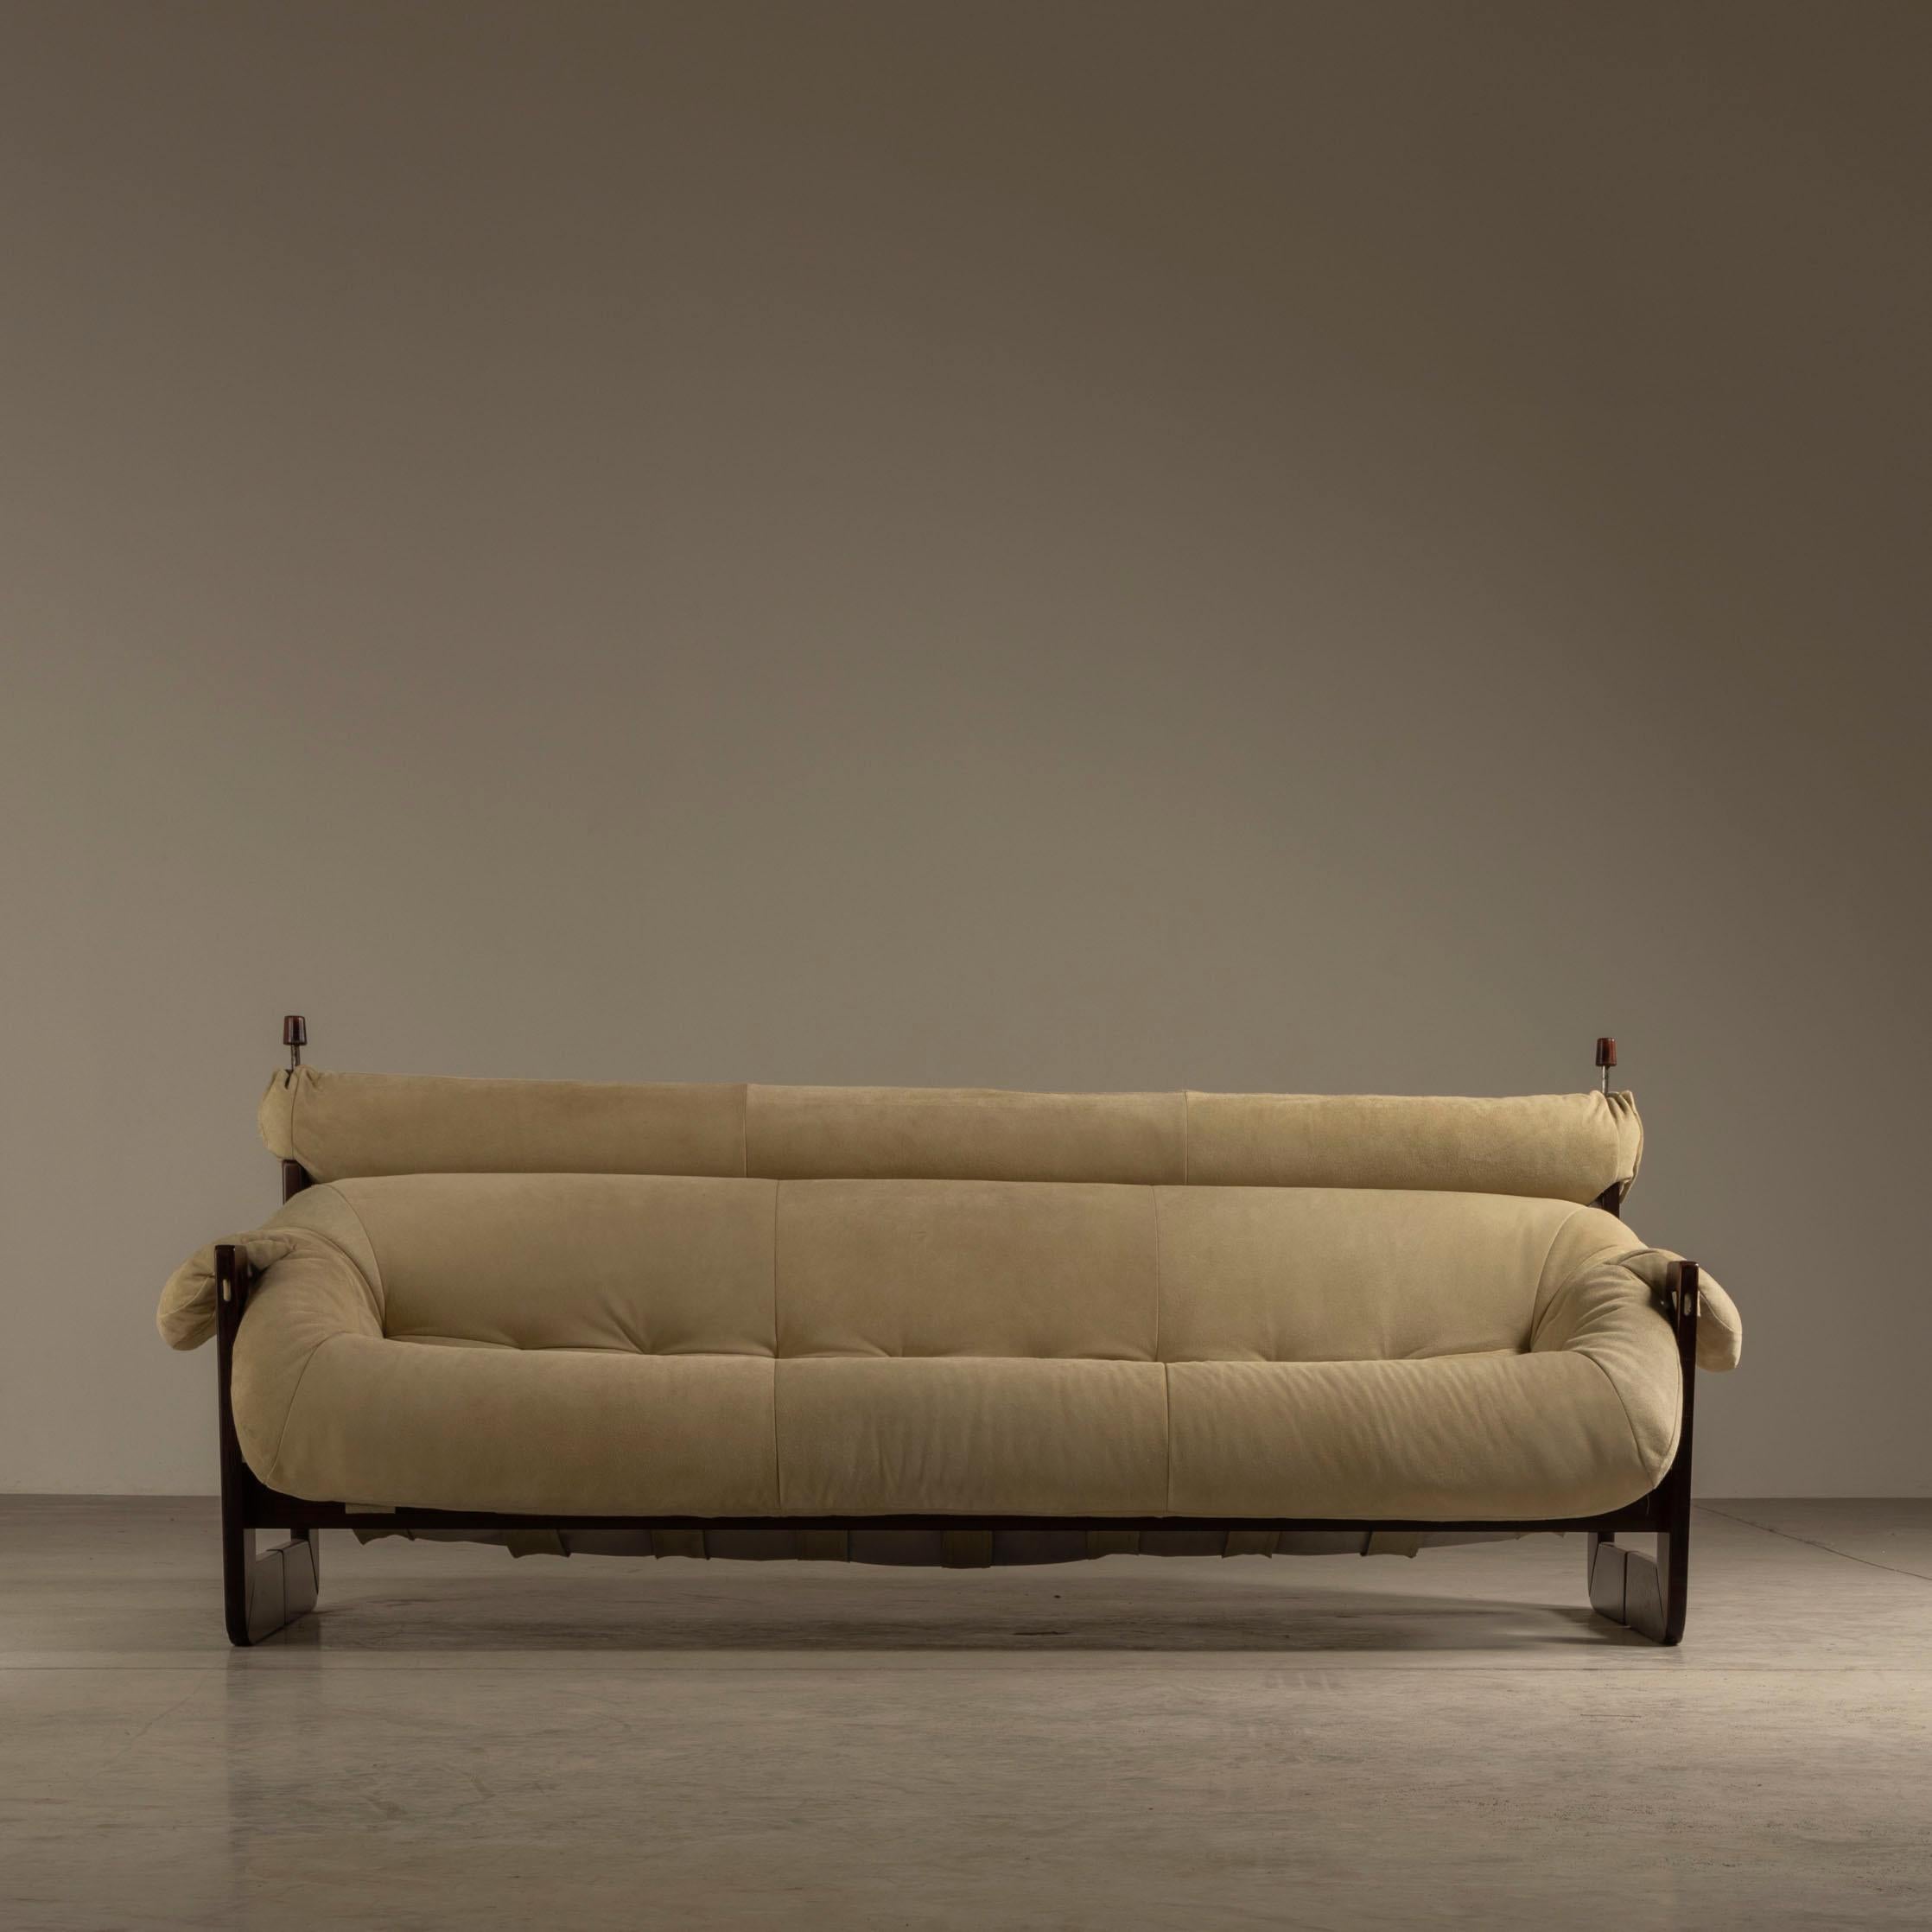 The MP-97 sofa by Percival Lafer is a stunning piece that showcases the designer's imaginative and innovative mind. The frame is made of Jatobá wood, and the seat and backrest are made of a single injected foam, which creates a comfortable seating